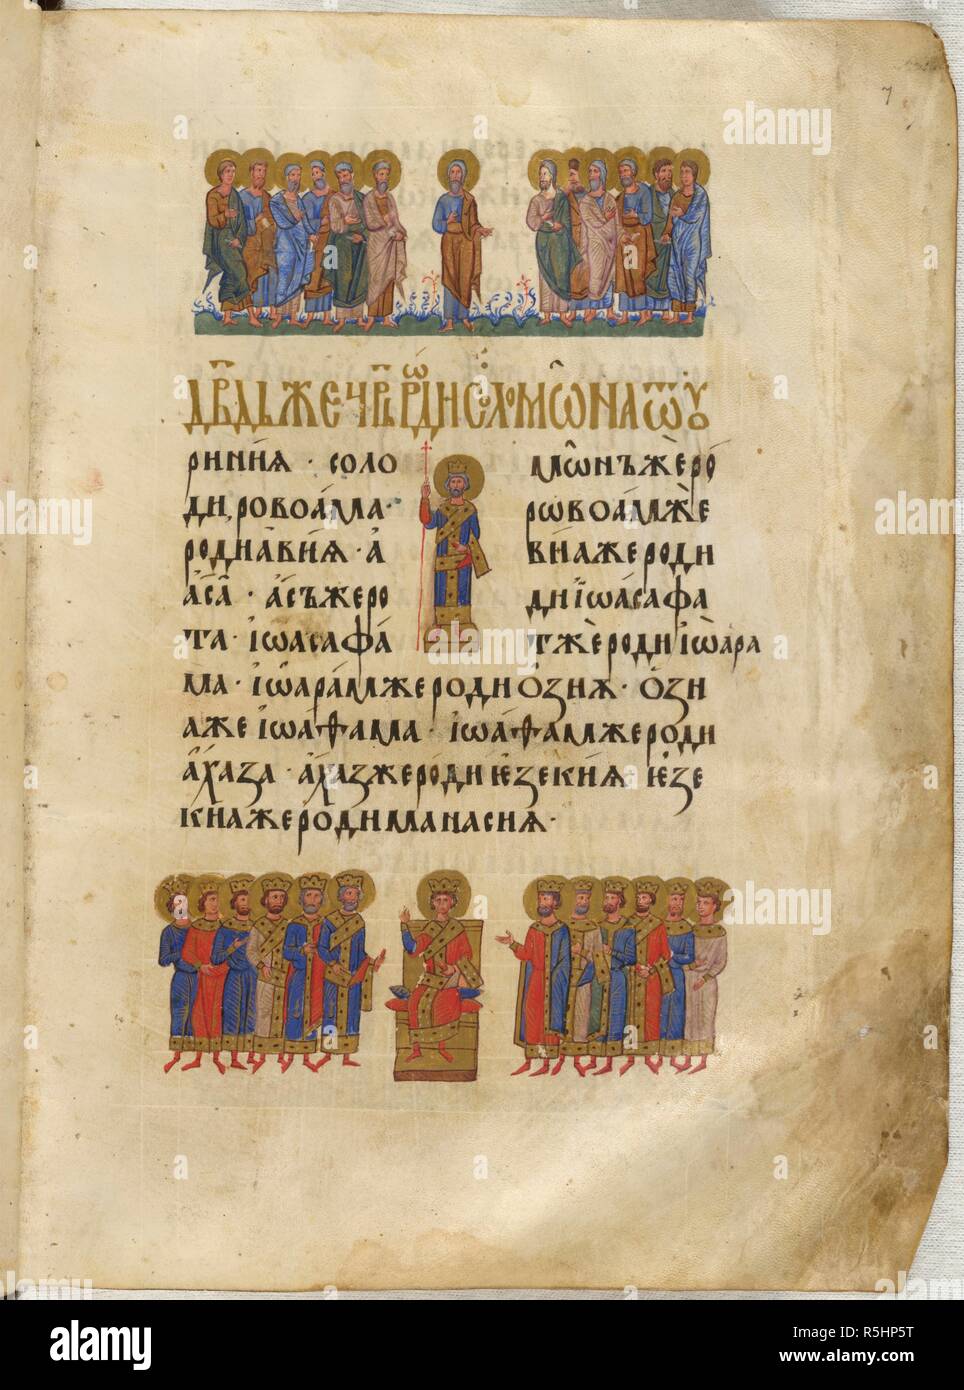 Judah and his brothers. The Gospels of Tsar Ivan Alexander. Turnovo, 1355-1356. [Whole folio] Gospel of St Matthew, chapter 1, relating to the genealogy of Christ. Judah and his brothers, King David and King Solomon, at his court. Text  Image taken from The Gospels of Tsar Ivan Alexander.  Originally published/produced in Turnovo, 1355-1356. . Source: Add. 39627, f.7. Language: Bulgarian Church Slavonic. Author: SIMEON. Turnovo school. Stock Photo